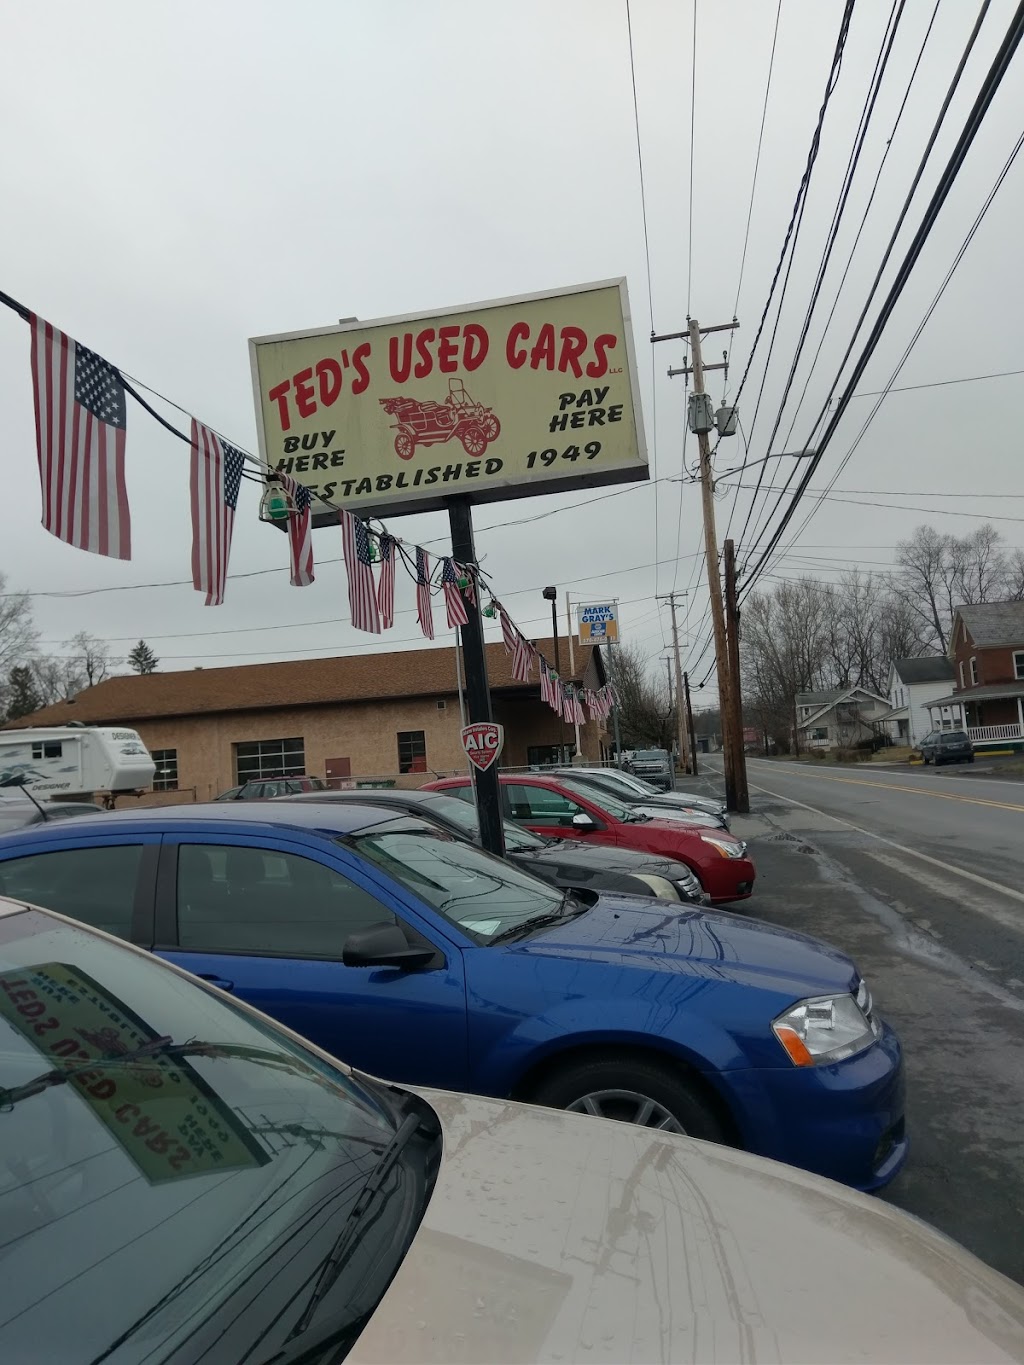 Teds Used Cars | 1723 W Main St, Stroudsburg, PA 18360 | Phone: (570) 857-2303